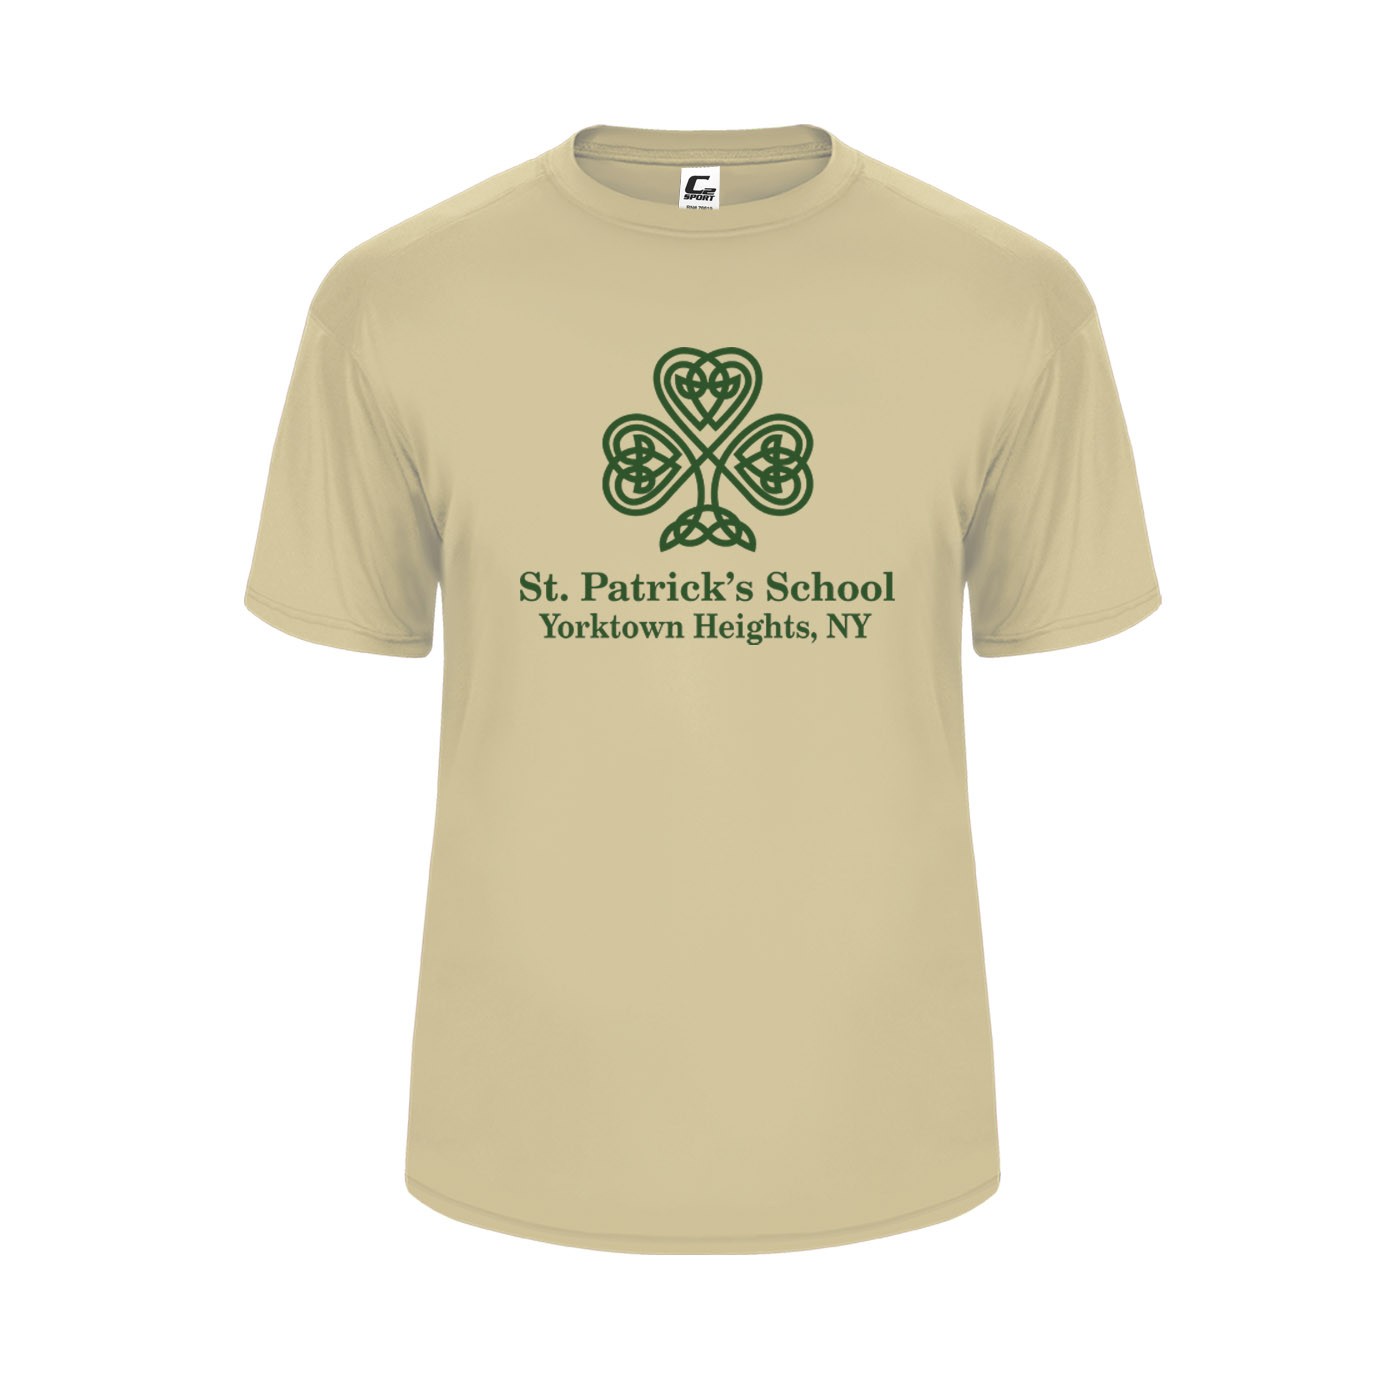 SPS S/S Spirit Performance T-Shirt w/ Full Front Green Logo - Please Allow 2-3 Weeks for Delivery